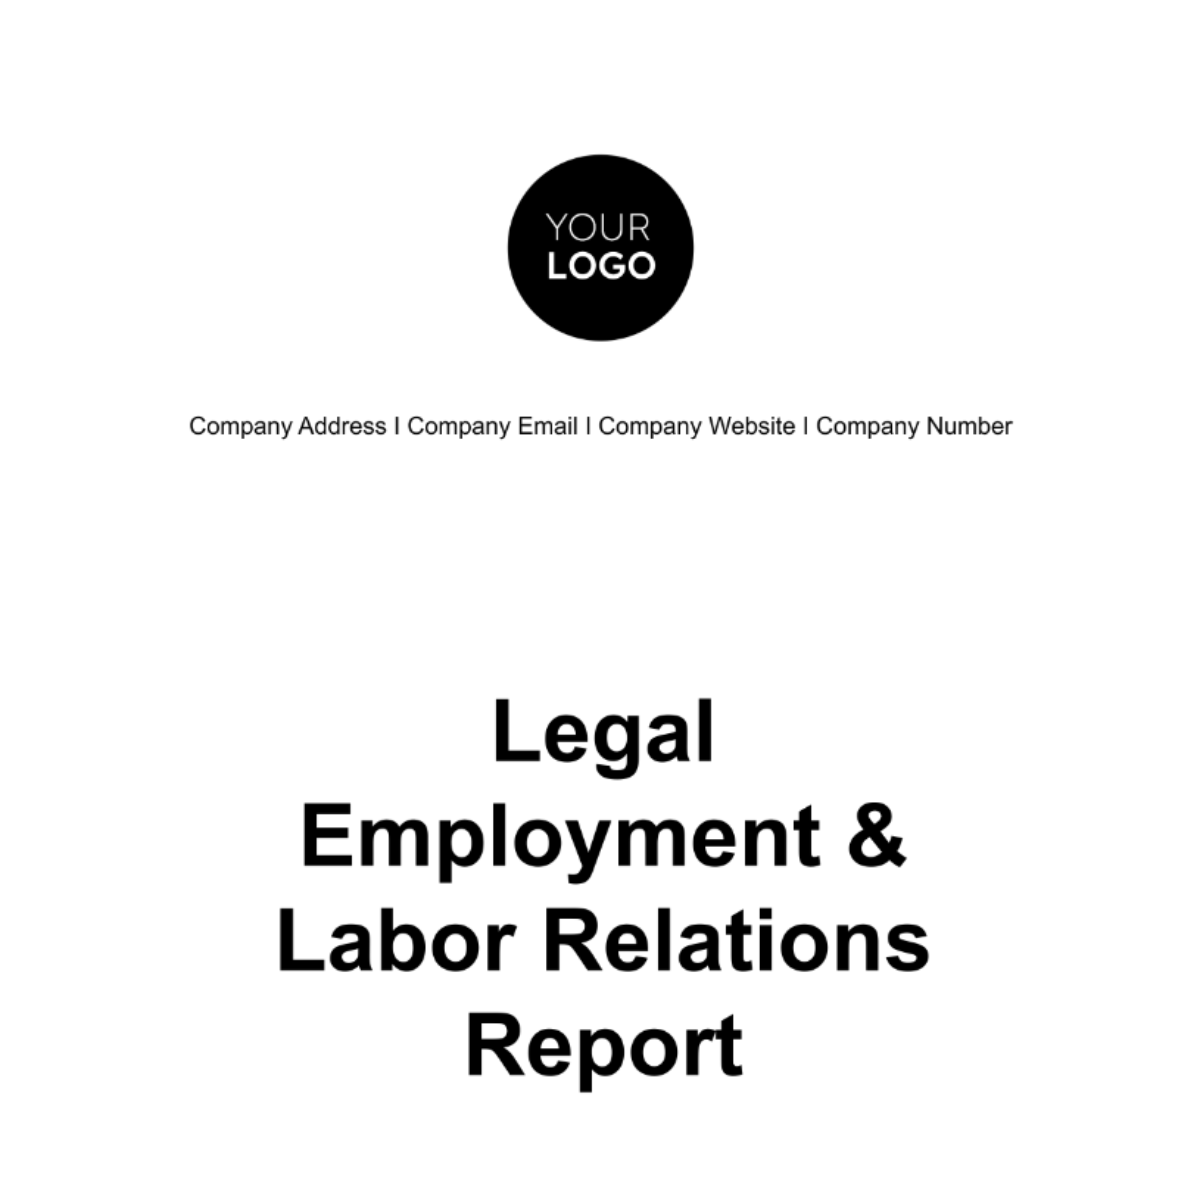 Legal Employment & Labor Relations Report Template